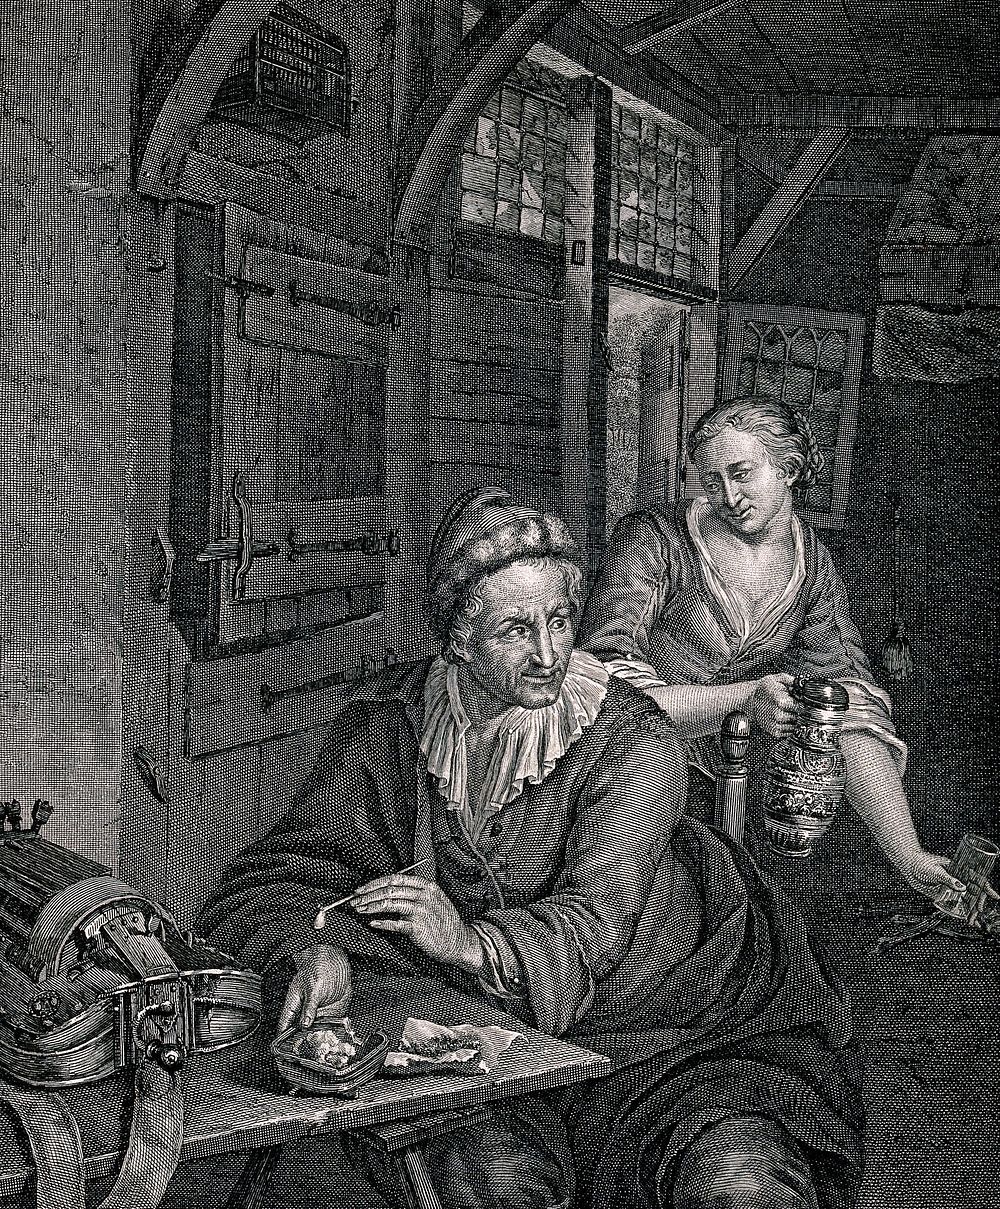 A man sits smoking at a table as a woman brings him drink. Engraving by L. Gaineau, 1785, after G. Mieris.